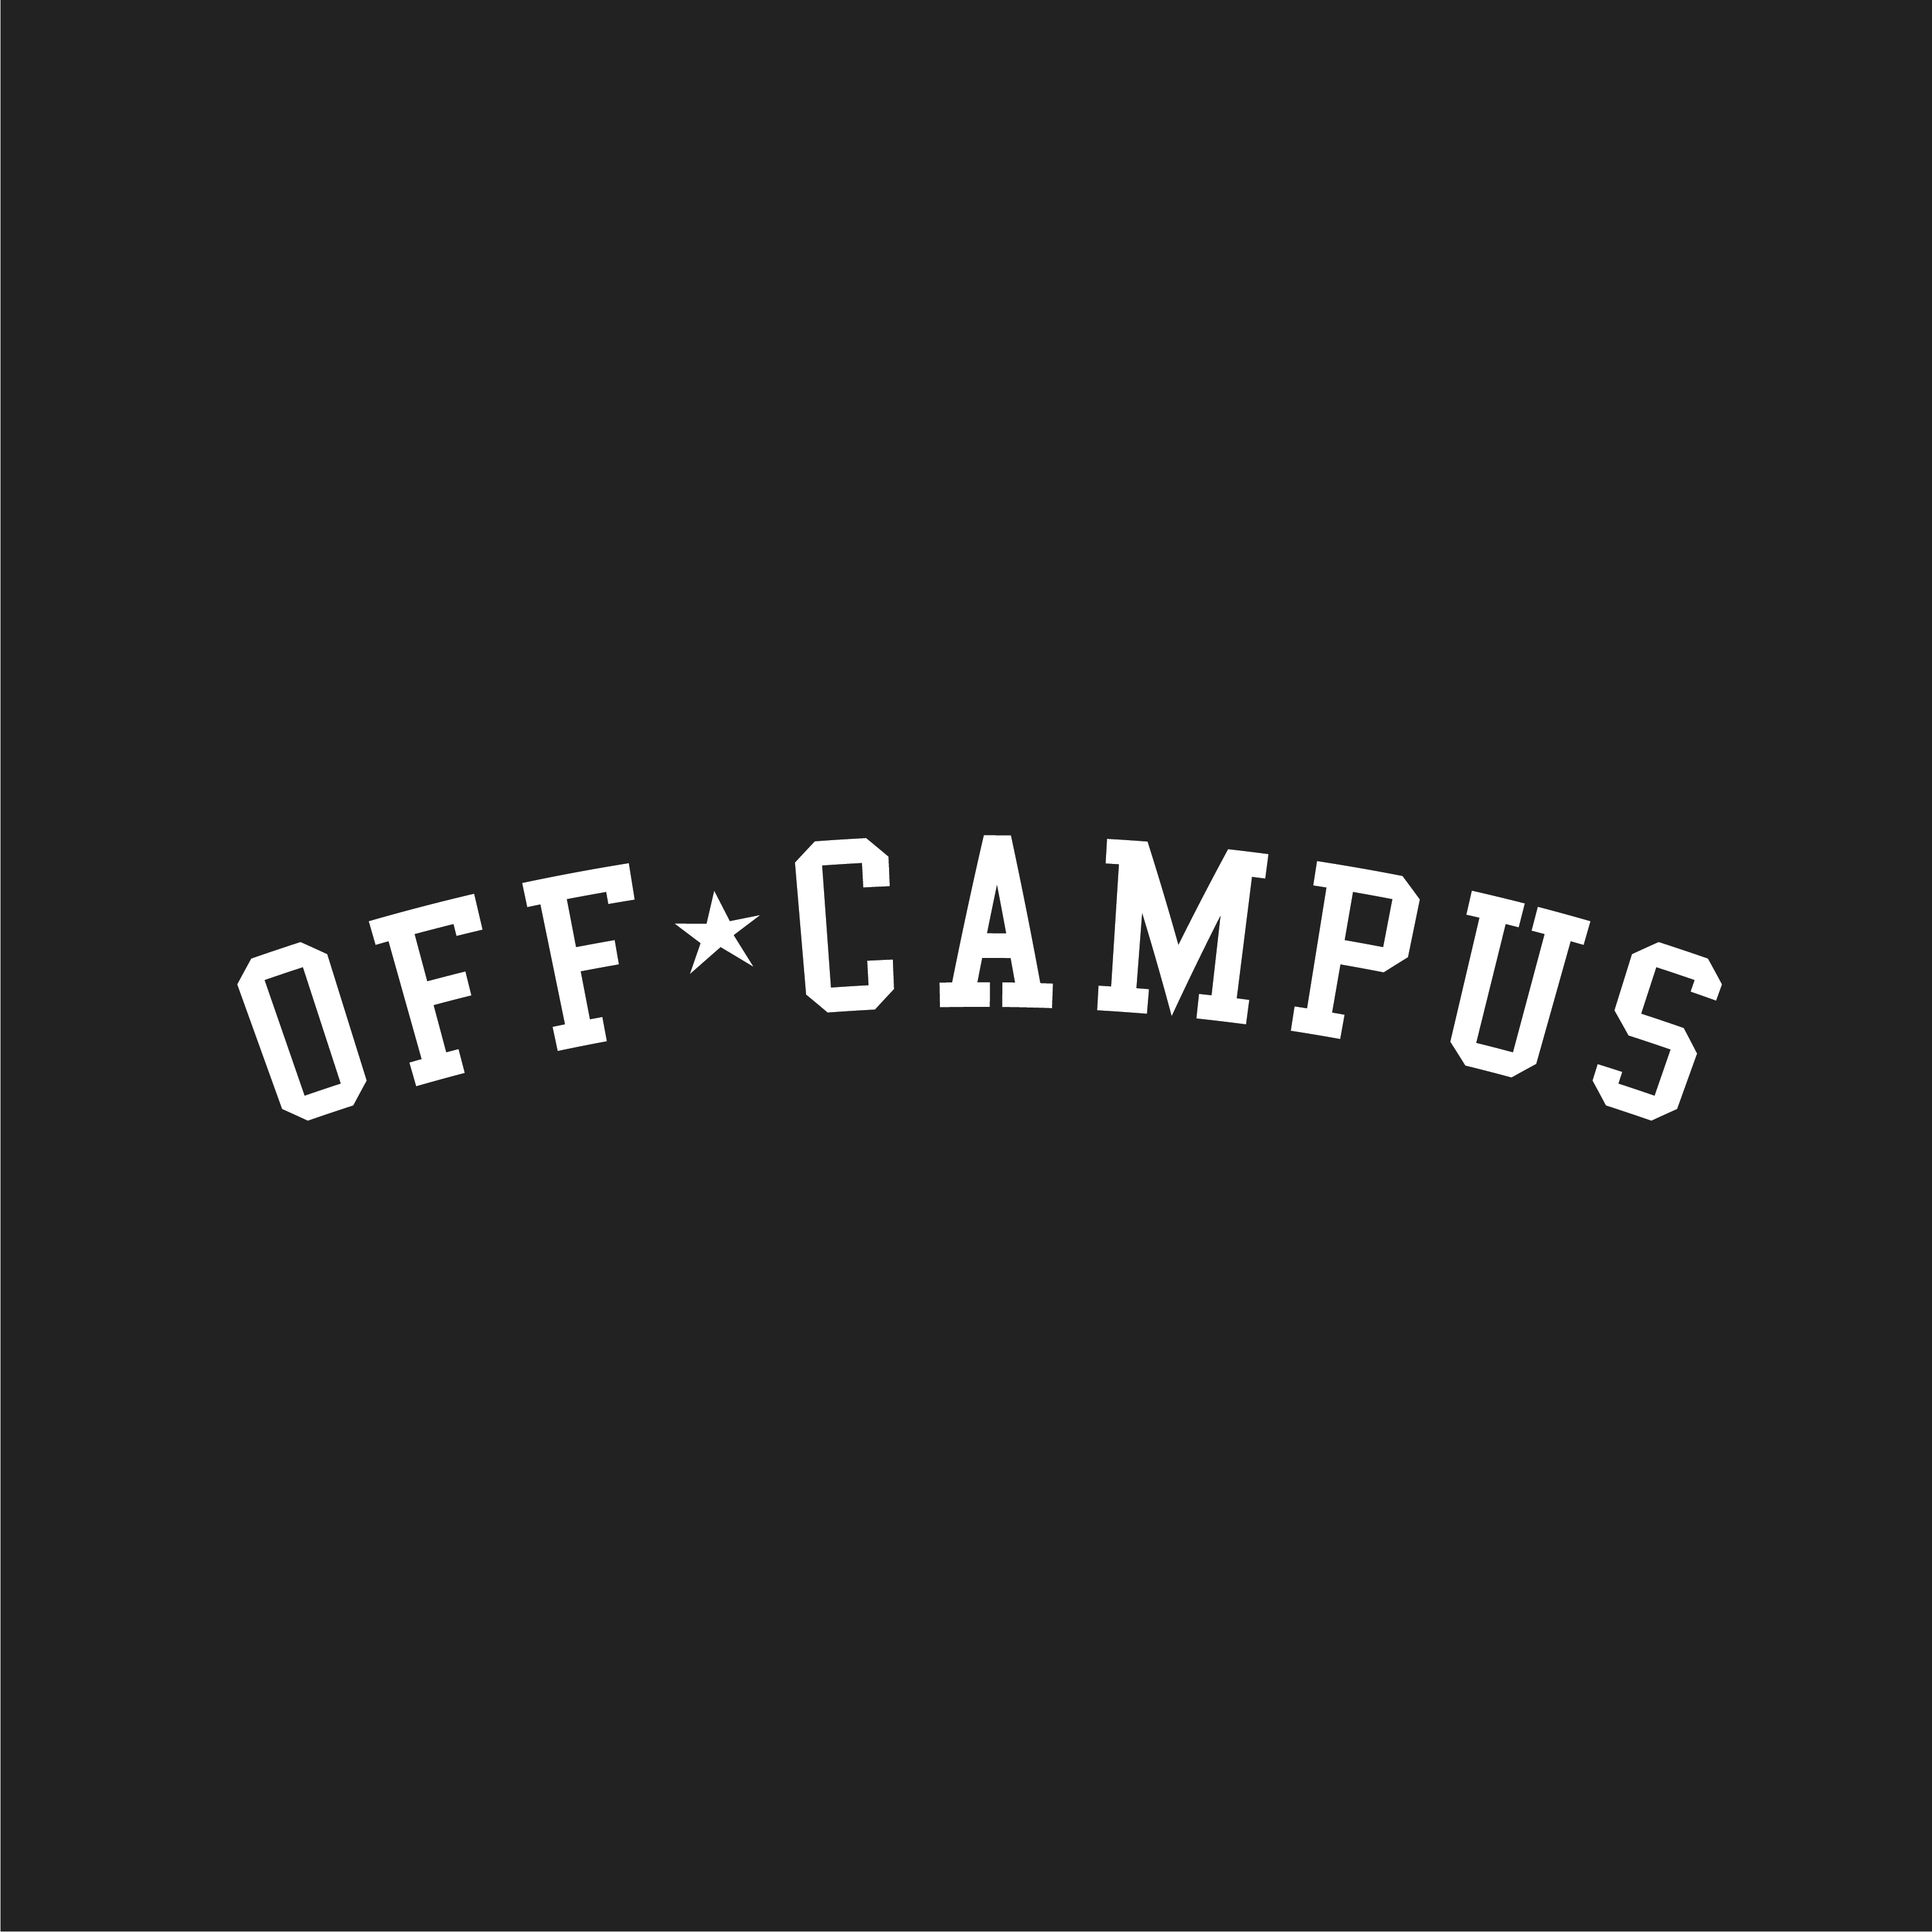 Everything they don't want you to know. • college content unfiltered• 🎙: https://t.co/jLthCIOMQM 📧: offcampus@betches.com